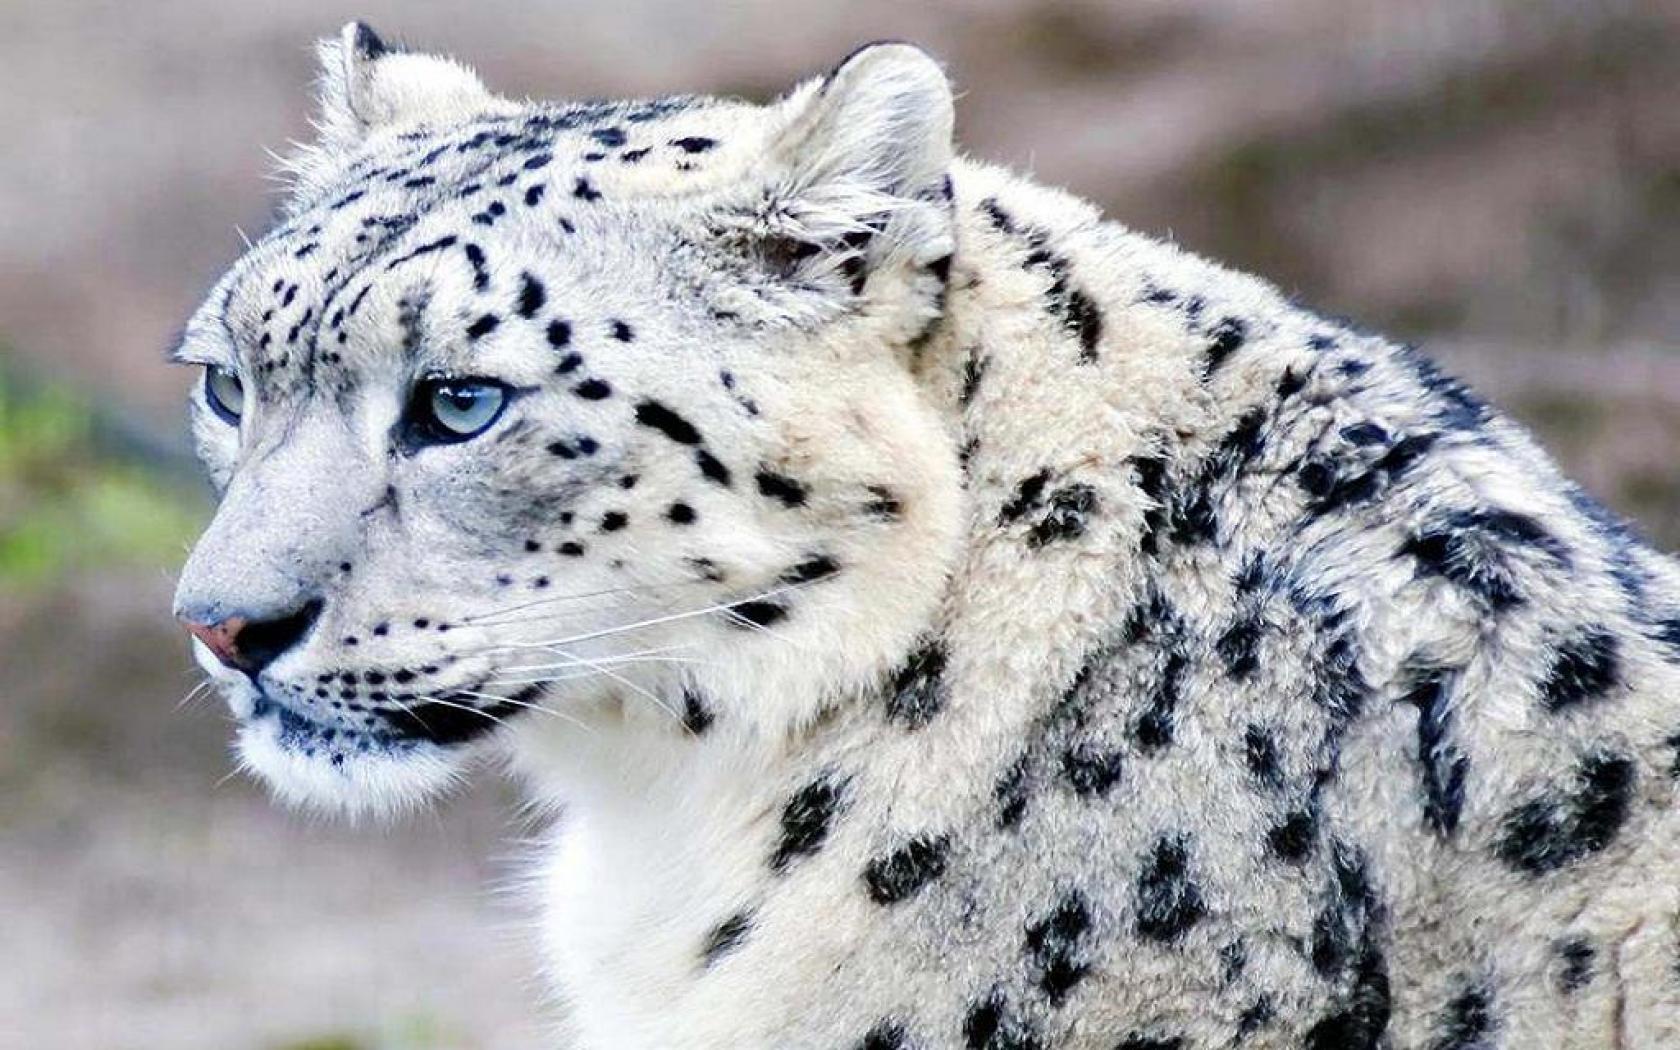  Snow Leopard Windows 8 and 10 themes and backgrounds Wallpapers 1680x1050